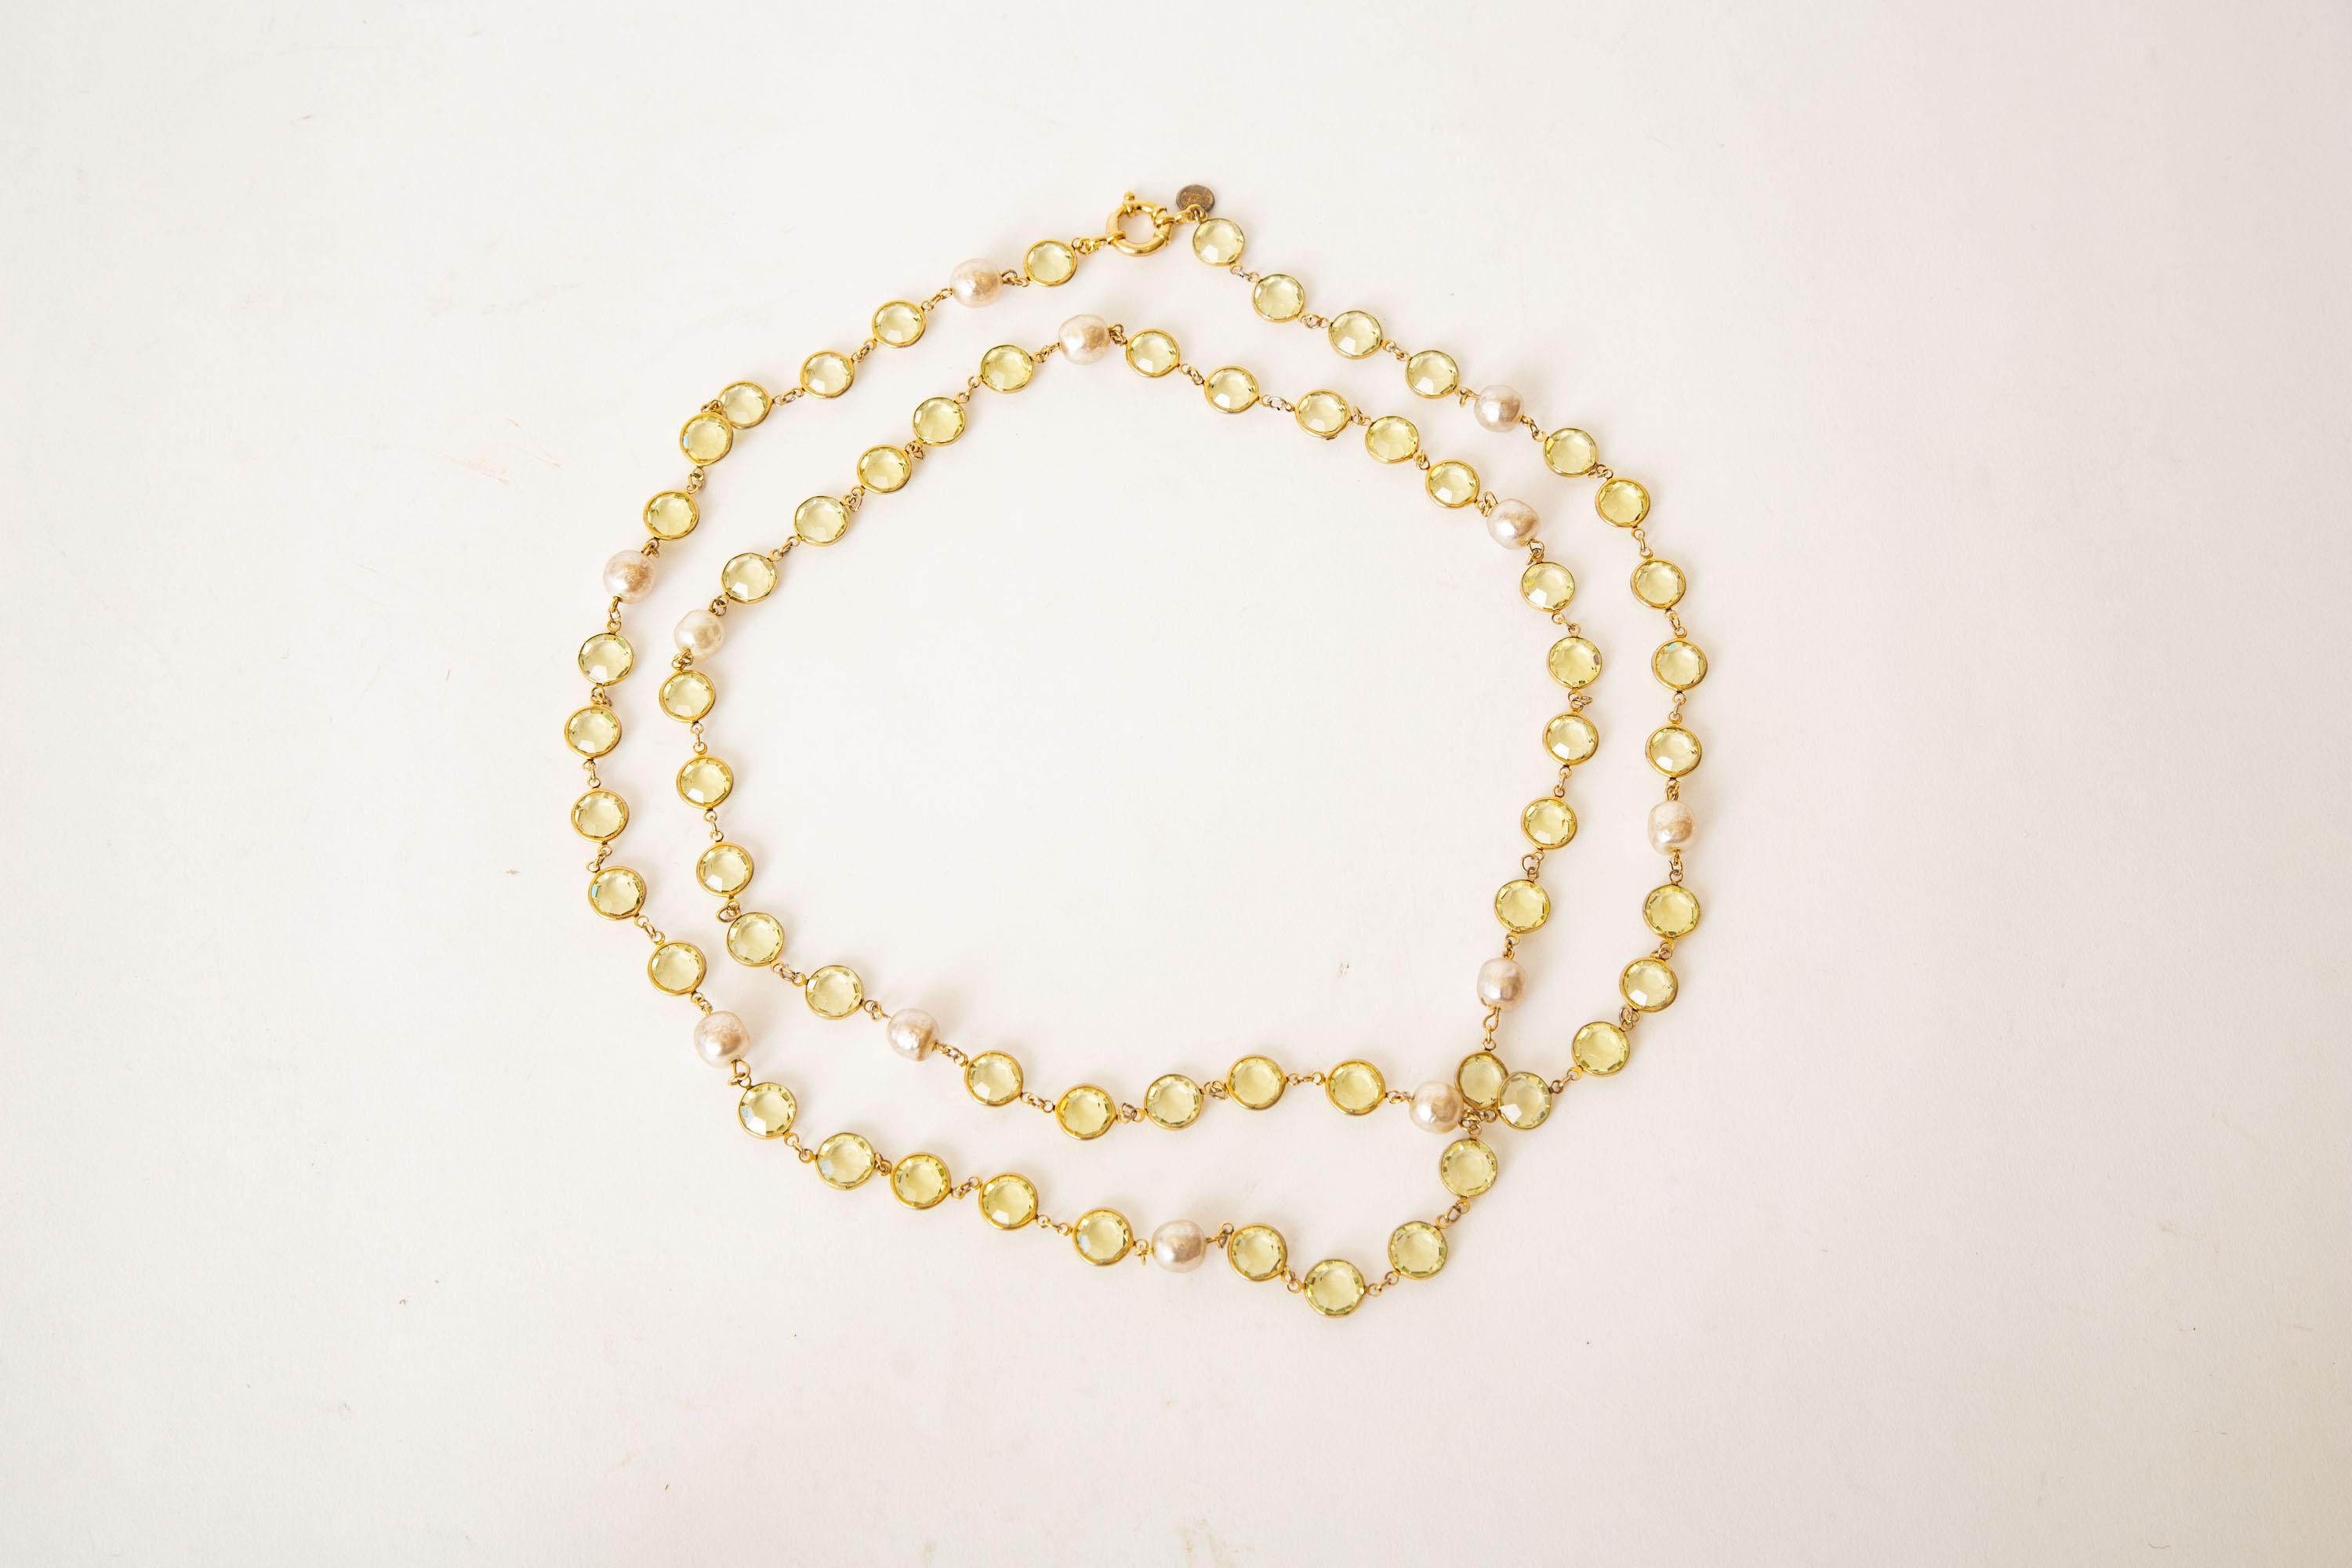 Modern Vintage Chanel Chartreuse Beveled Crystals And Faux Pearl Sautoir Wrap Necklace